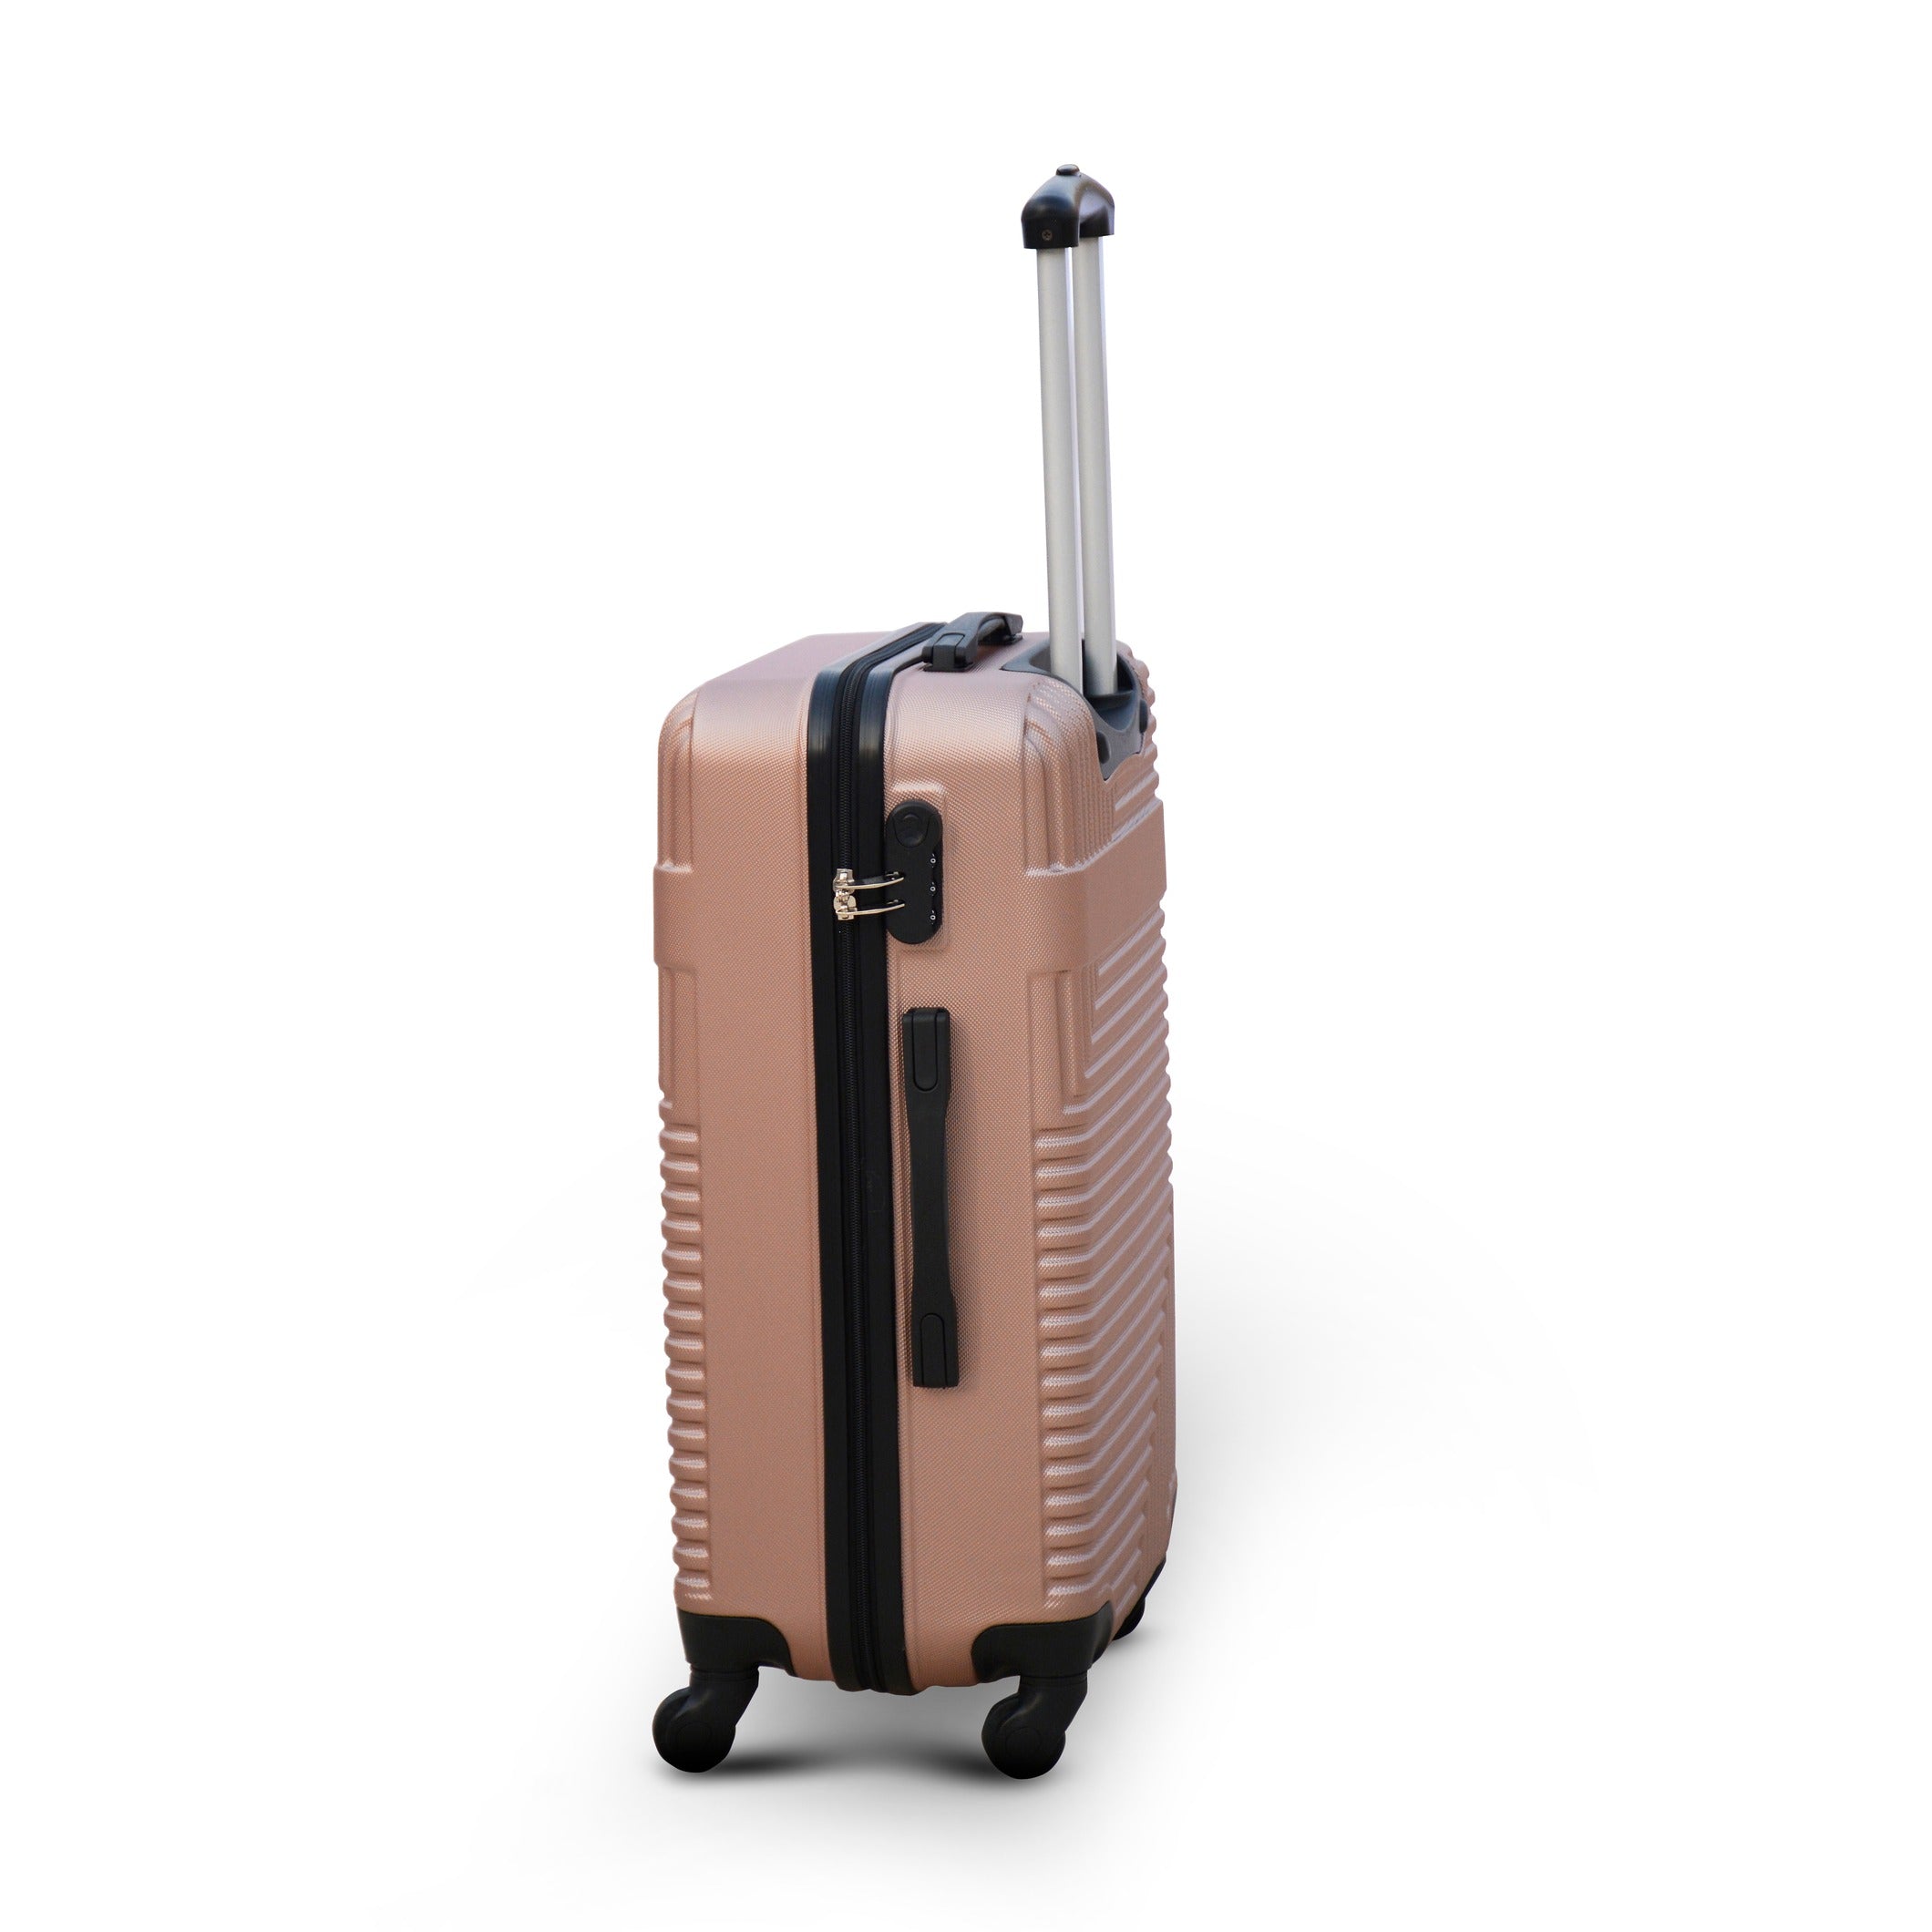 20" Rose Gold Colour Travel Way ABS Luggage Lightweight Hard Case Trolley Bag